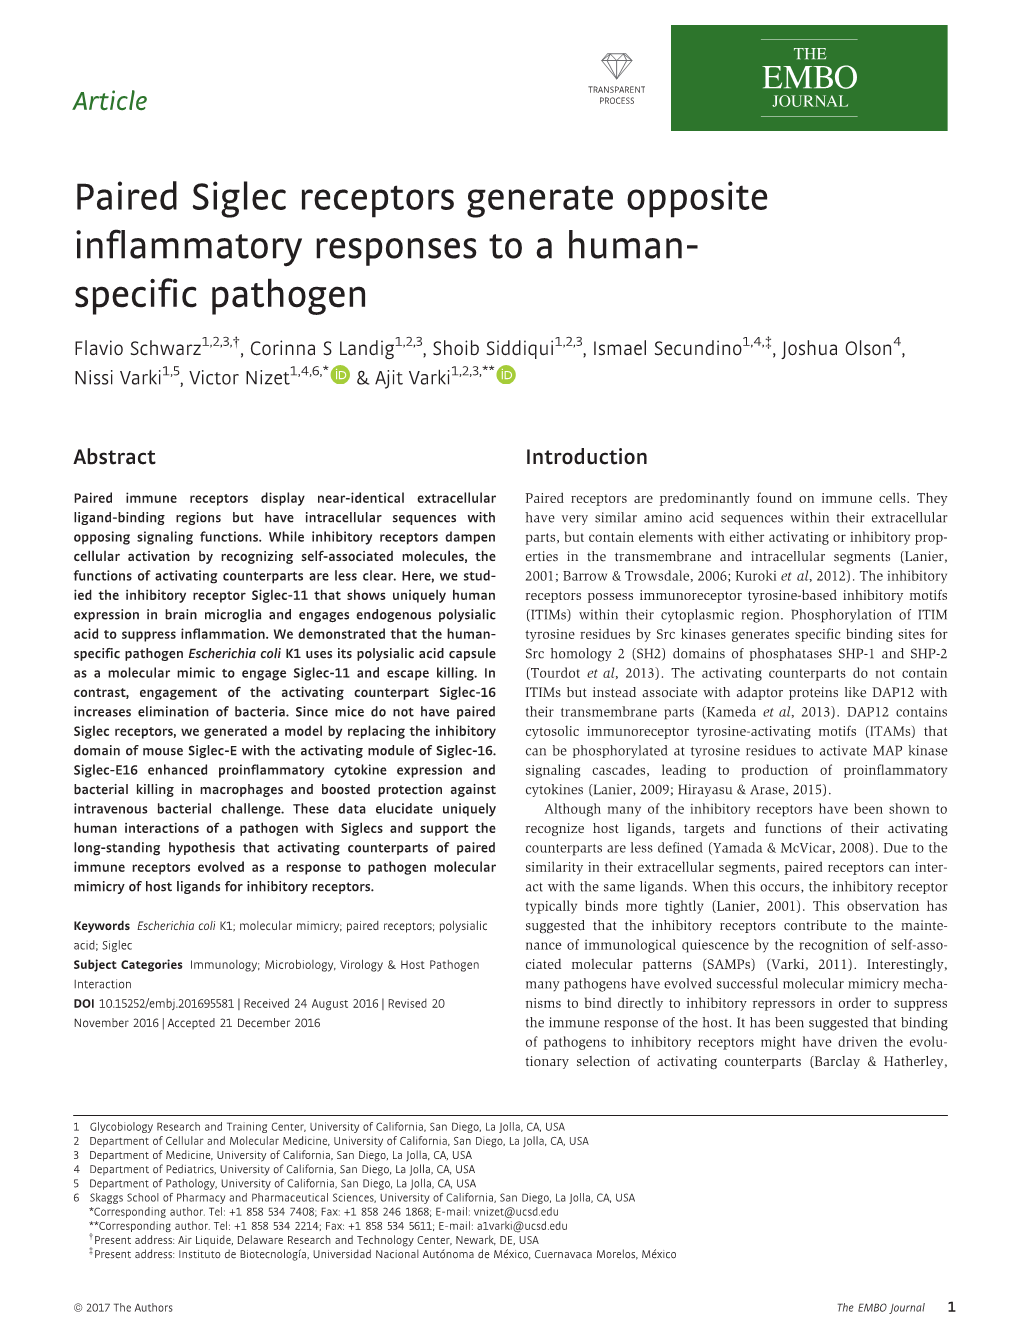 Paired Siglec Receptors Generate Opposite Inflammatory Responses to a Human- Specific Pathogen